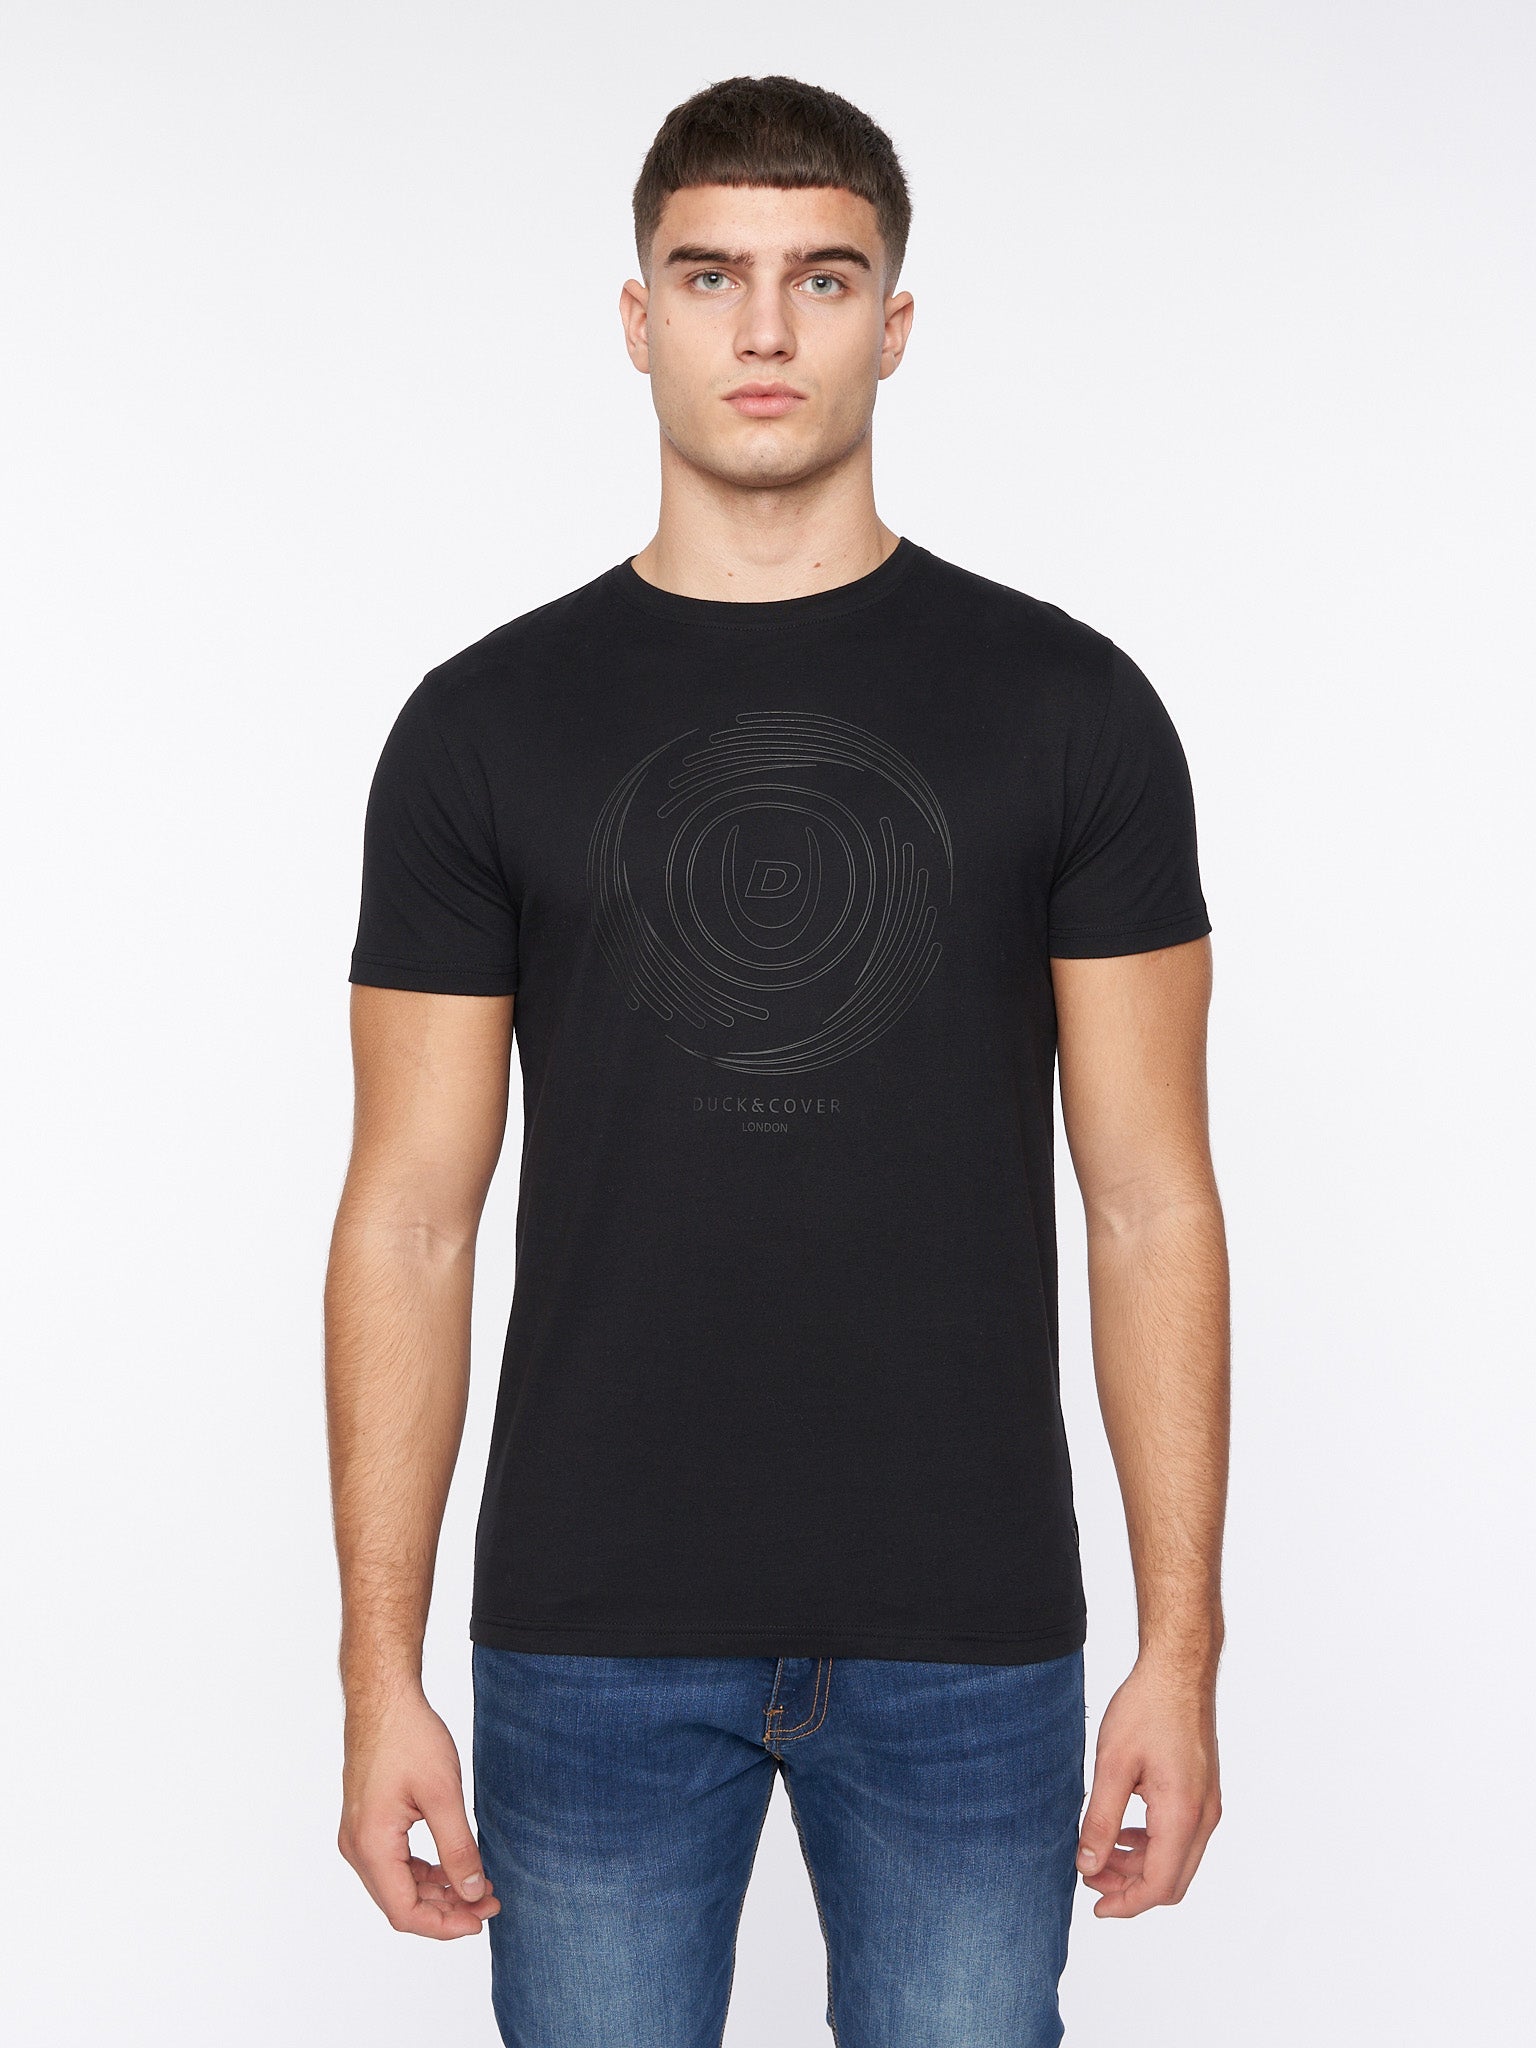 Duck & Cover - Mens Spinnaz T-Shirt Black – Duck and Cover